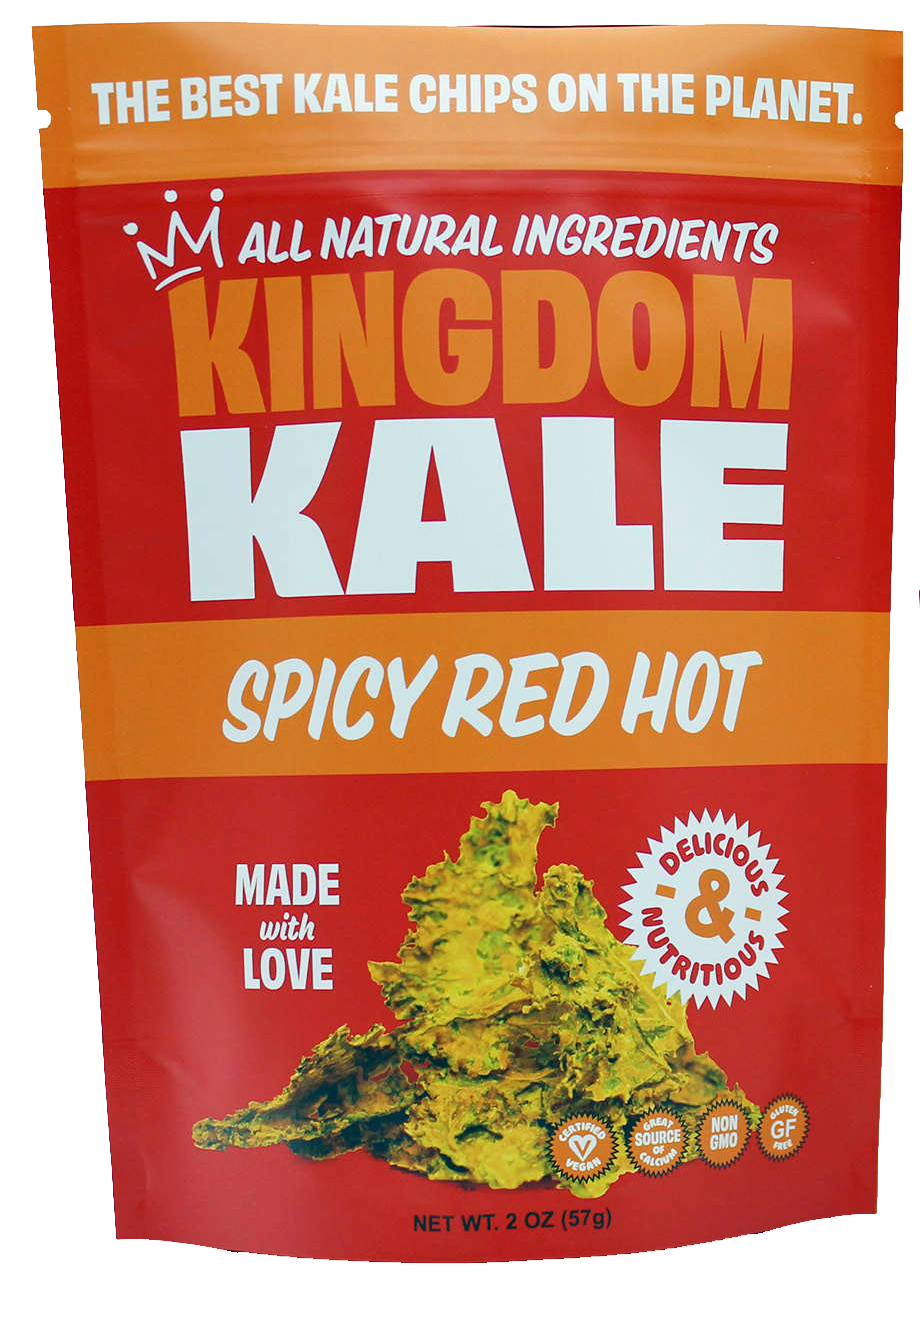 RED HOT KALE CHIPS